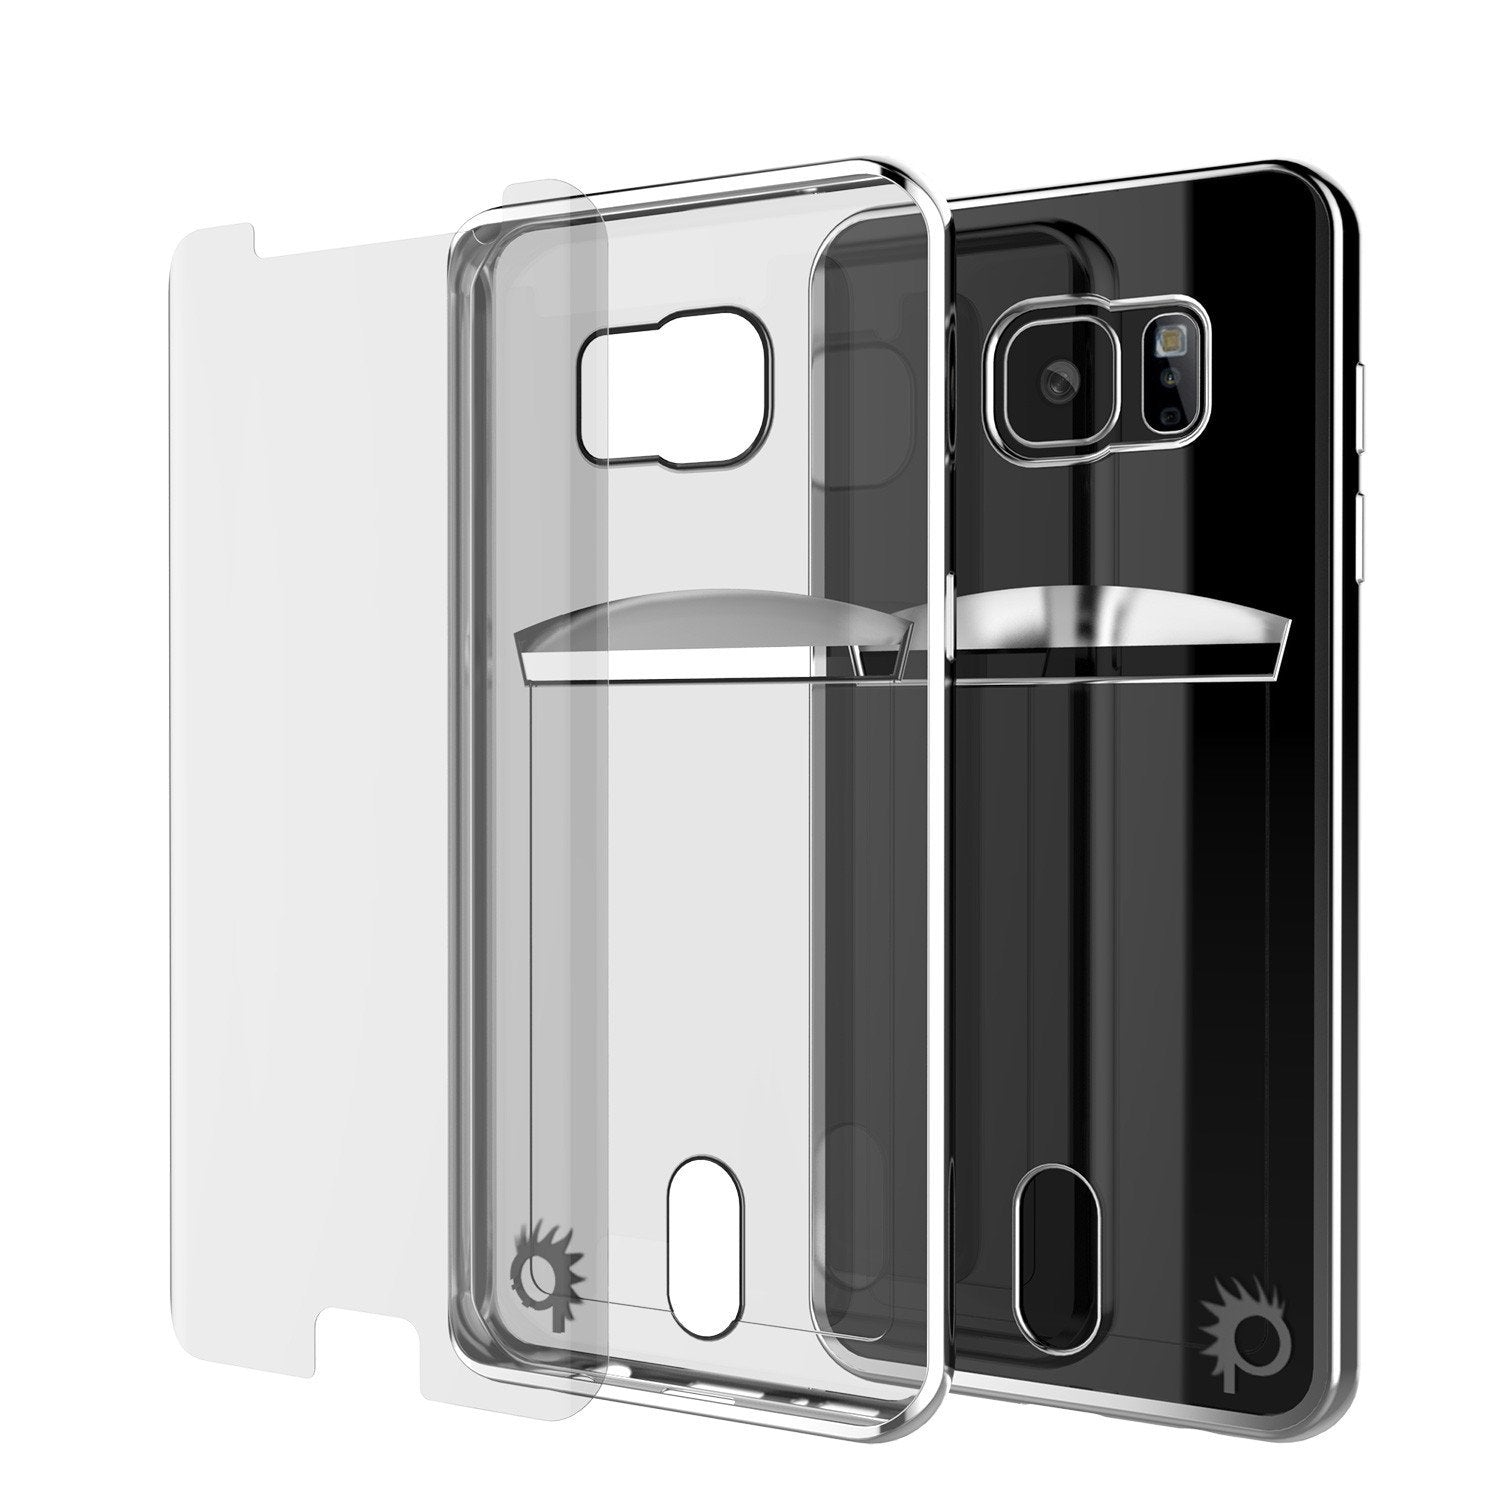 Galaxy S7 Case, PUNKCASE® LUCID Silver Series | Card Slot